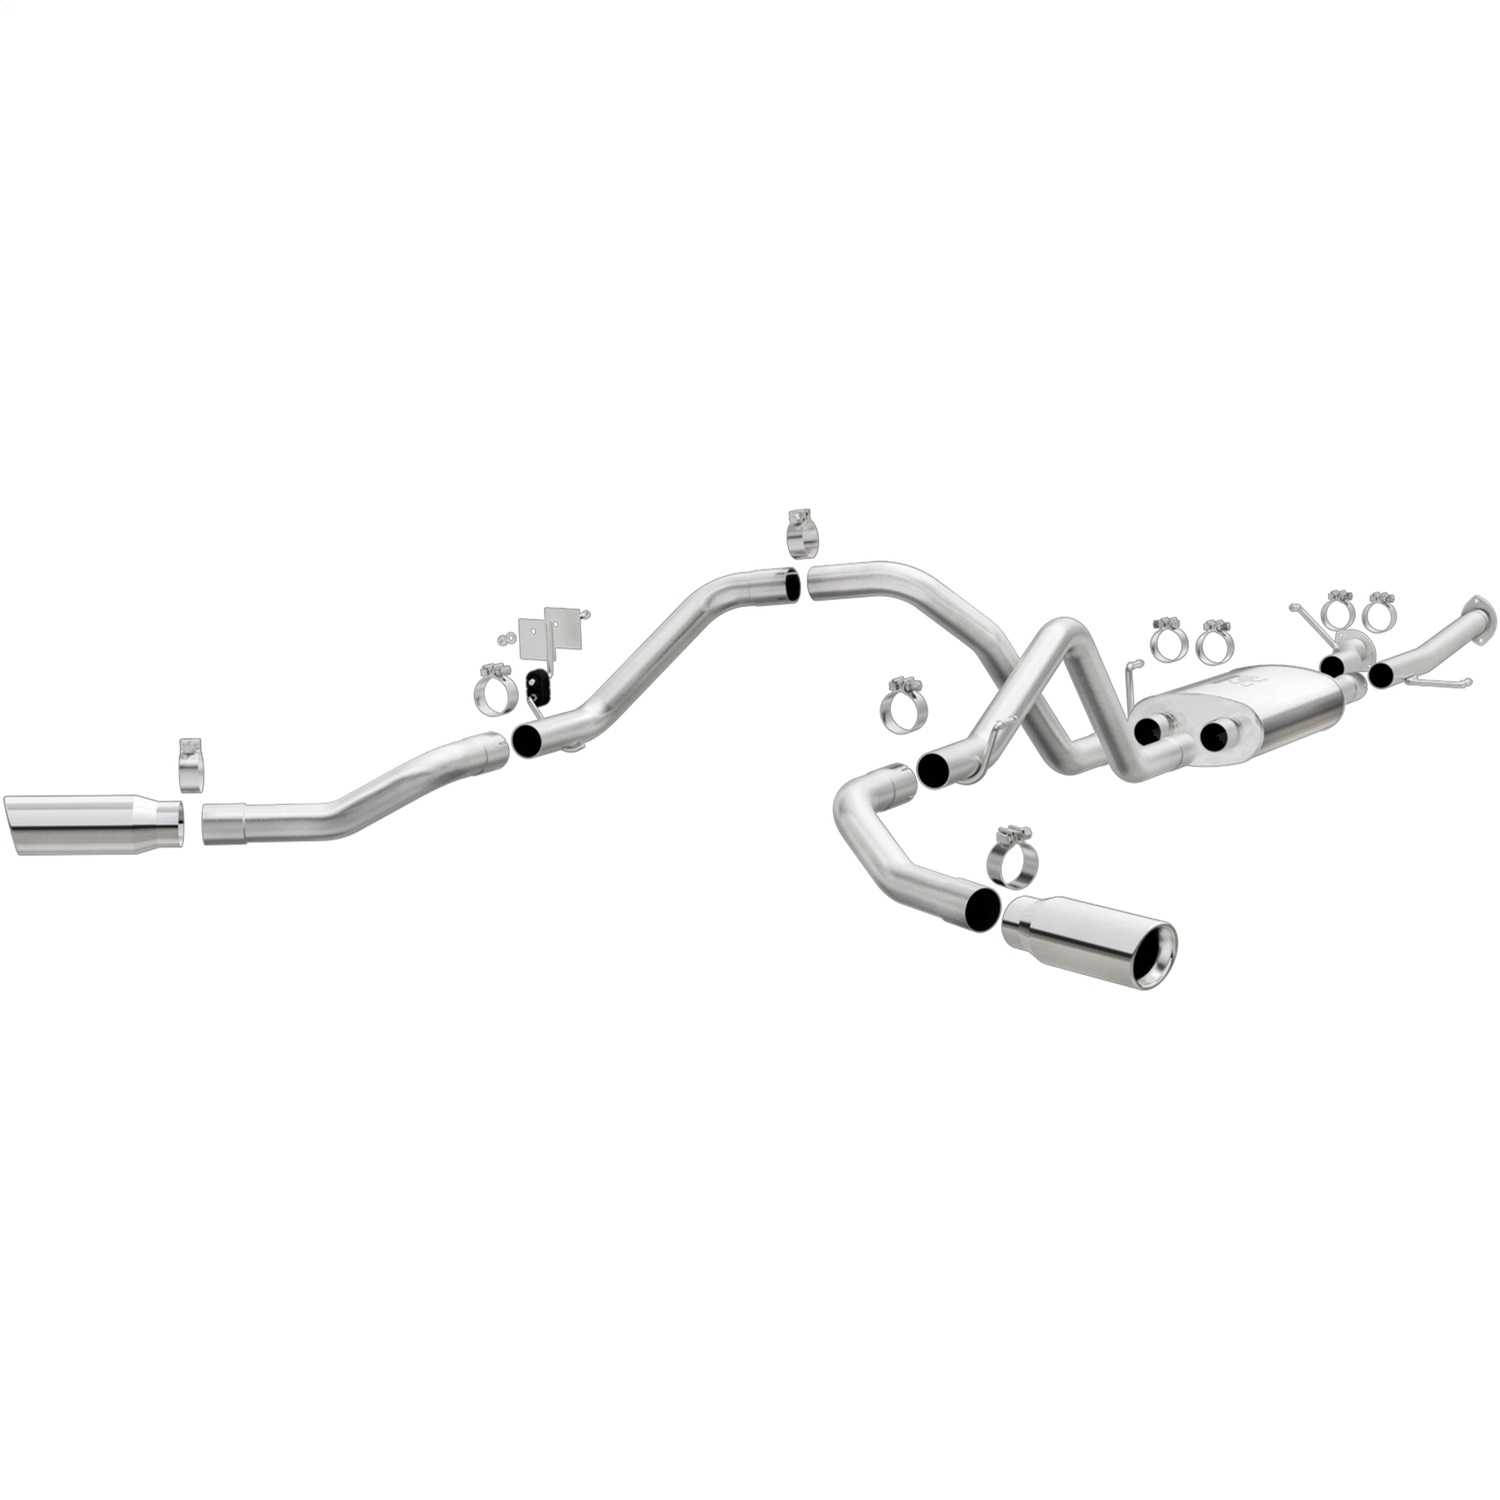 Magnaflow Performance Exhaust System Kit for 2009 -2020 Toyota Tundra 5